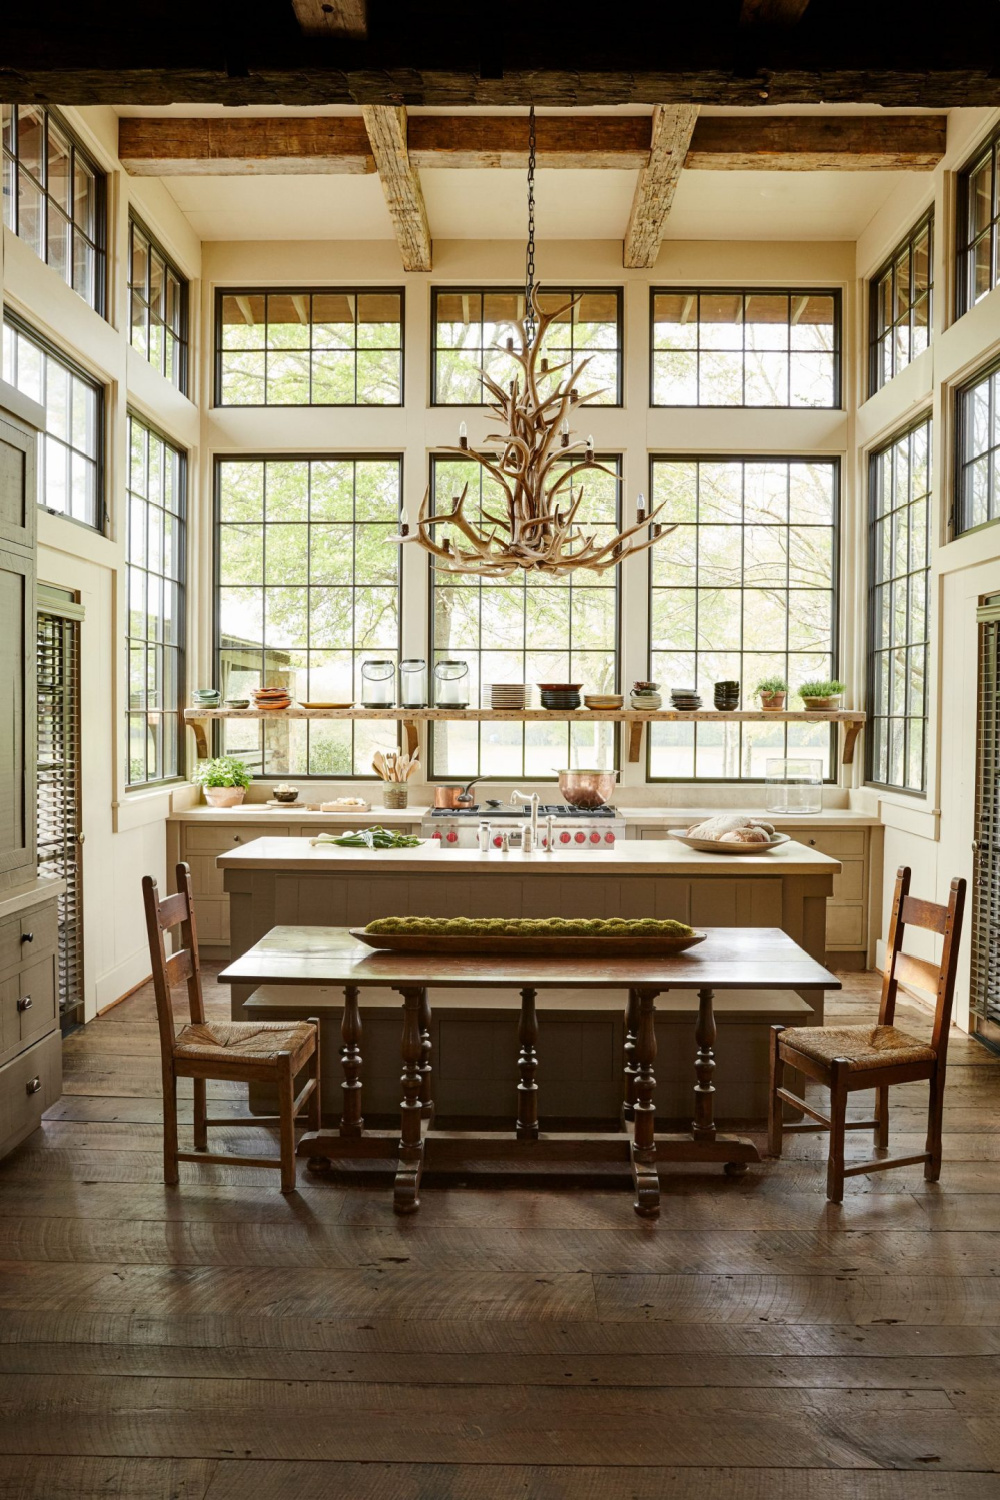 Magnificent walls of windows in a breathtaking rustic luxe kitchen designed by architect Jeffrey Dungan!